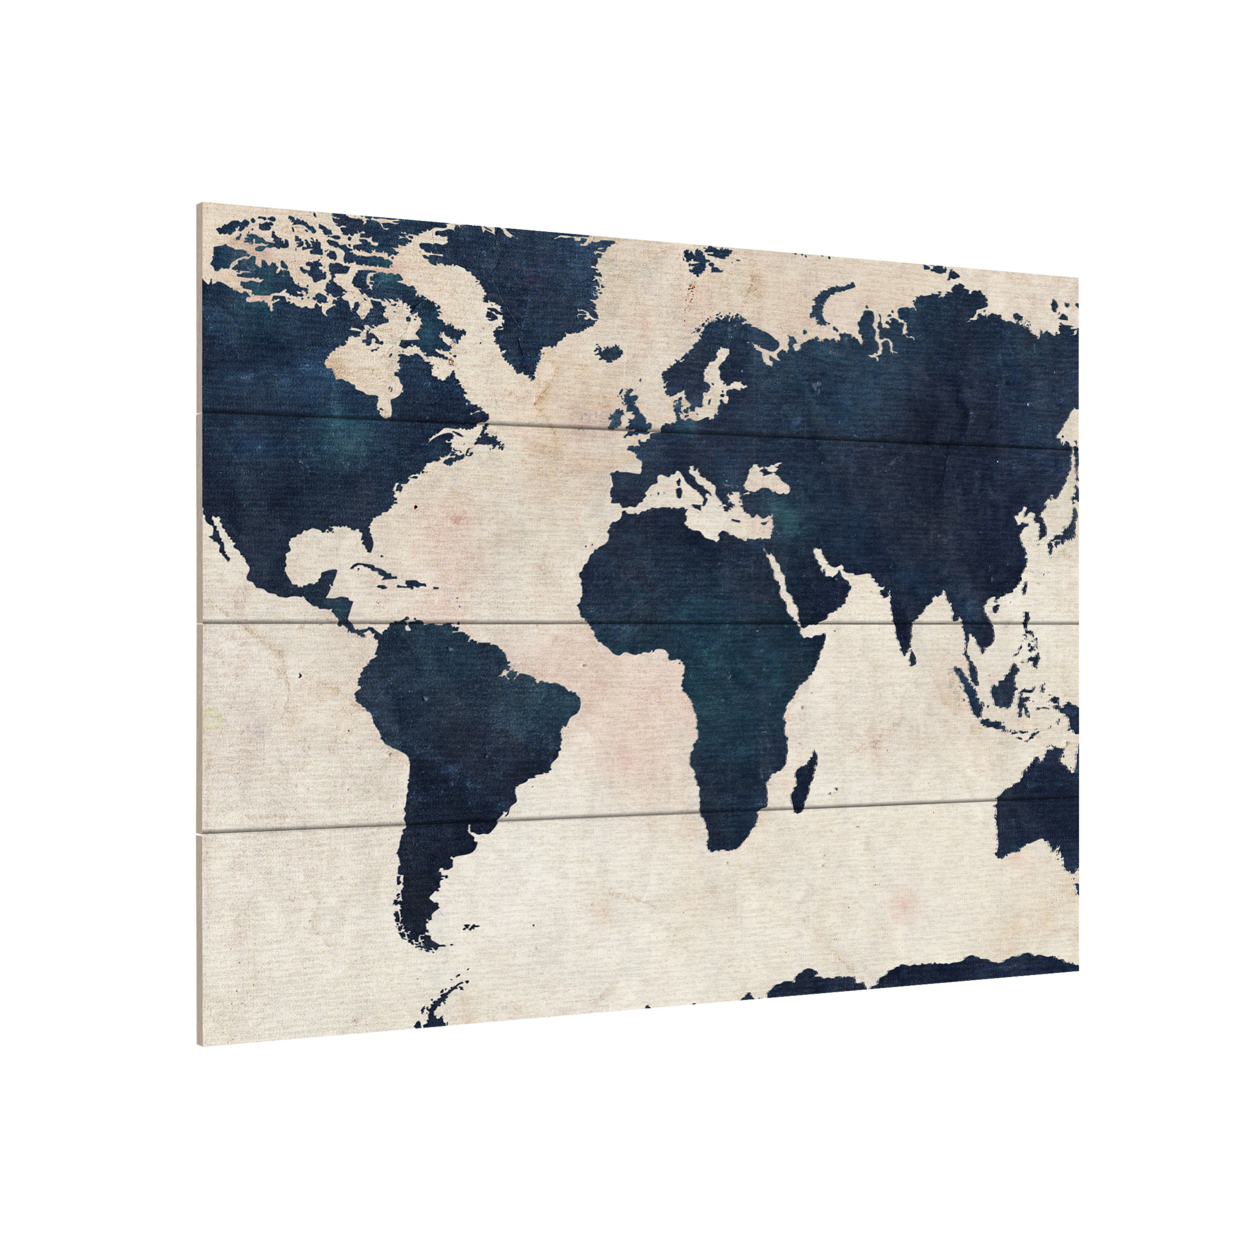 Wall Art 12 X 16 Inches Titled World Map -Navy Ready To Hang Printed On Wooden Planks